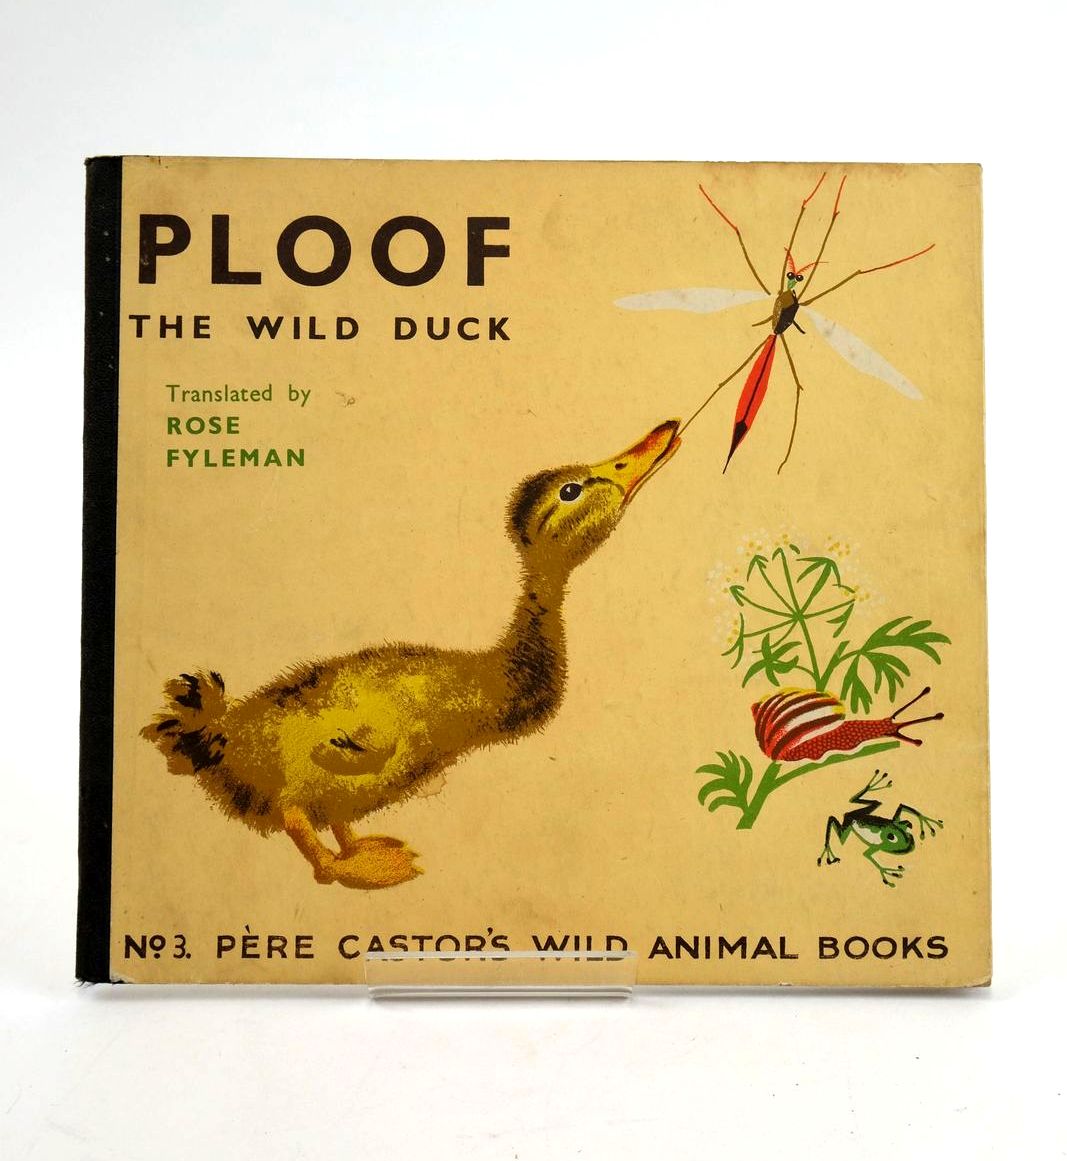 Photo of PLOOF THE WILD DUCK written by Lida,  Fyleman, Rose illustrated by Rojan,  published by George Allen &amp; Unwin Ltd. (STOCK CODE: 1324300)  for sale by Stella & Rose's Books